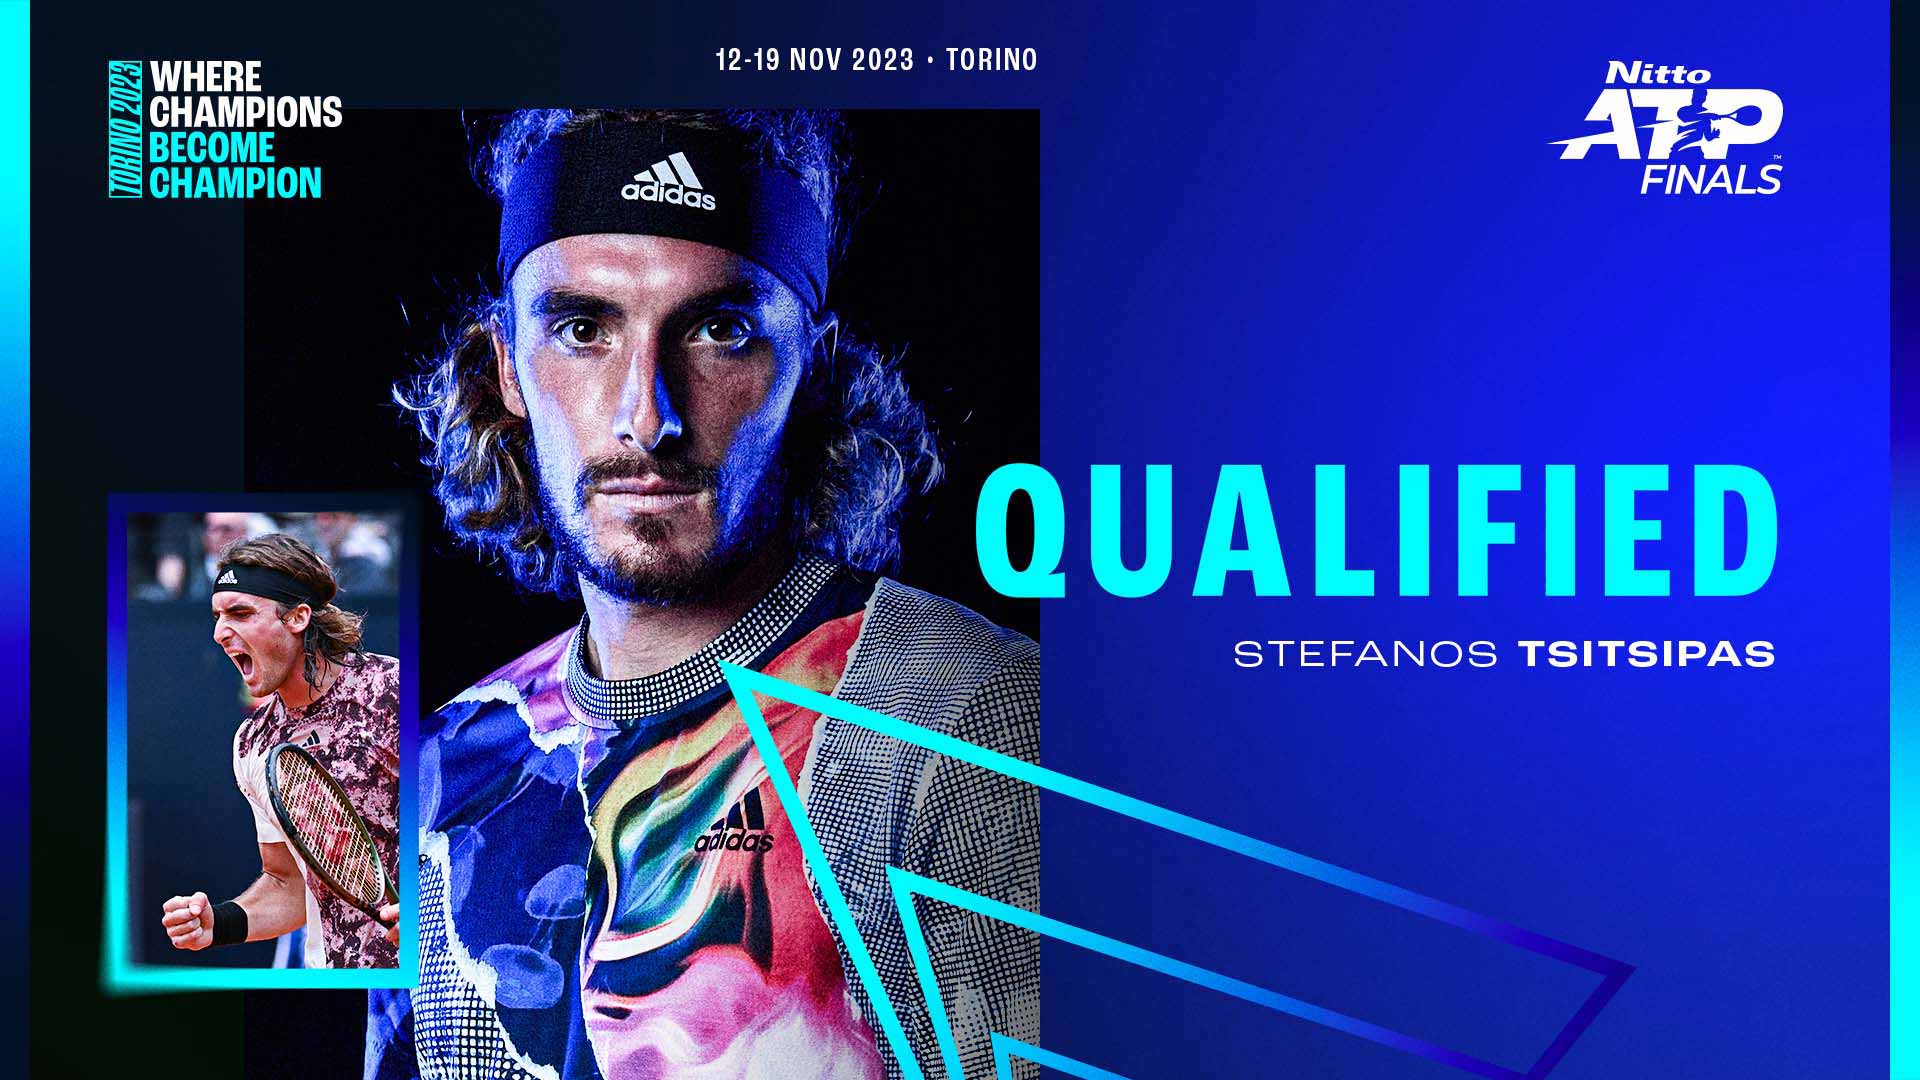 Stefanos Tsitsipas is the sixth singles player to qualify for the 2023 Nitto ATP Finals.